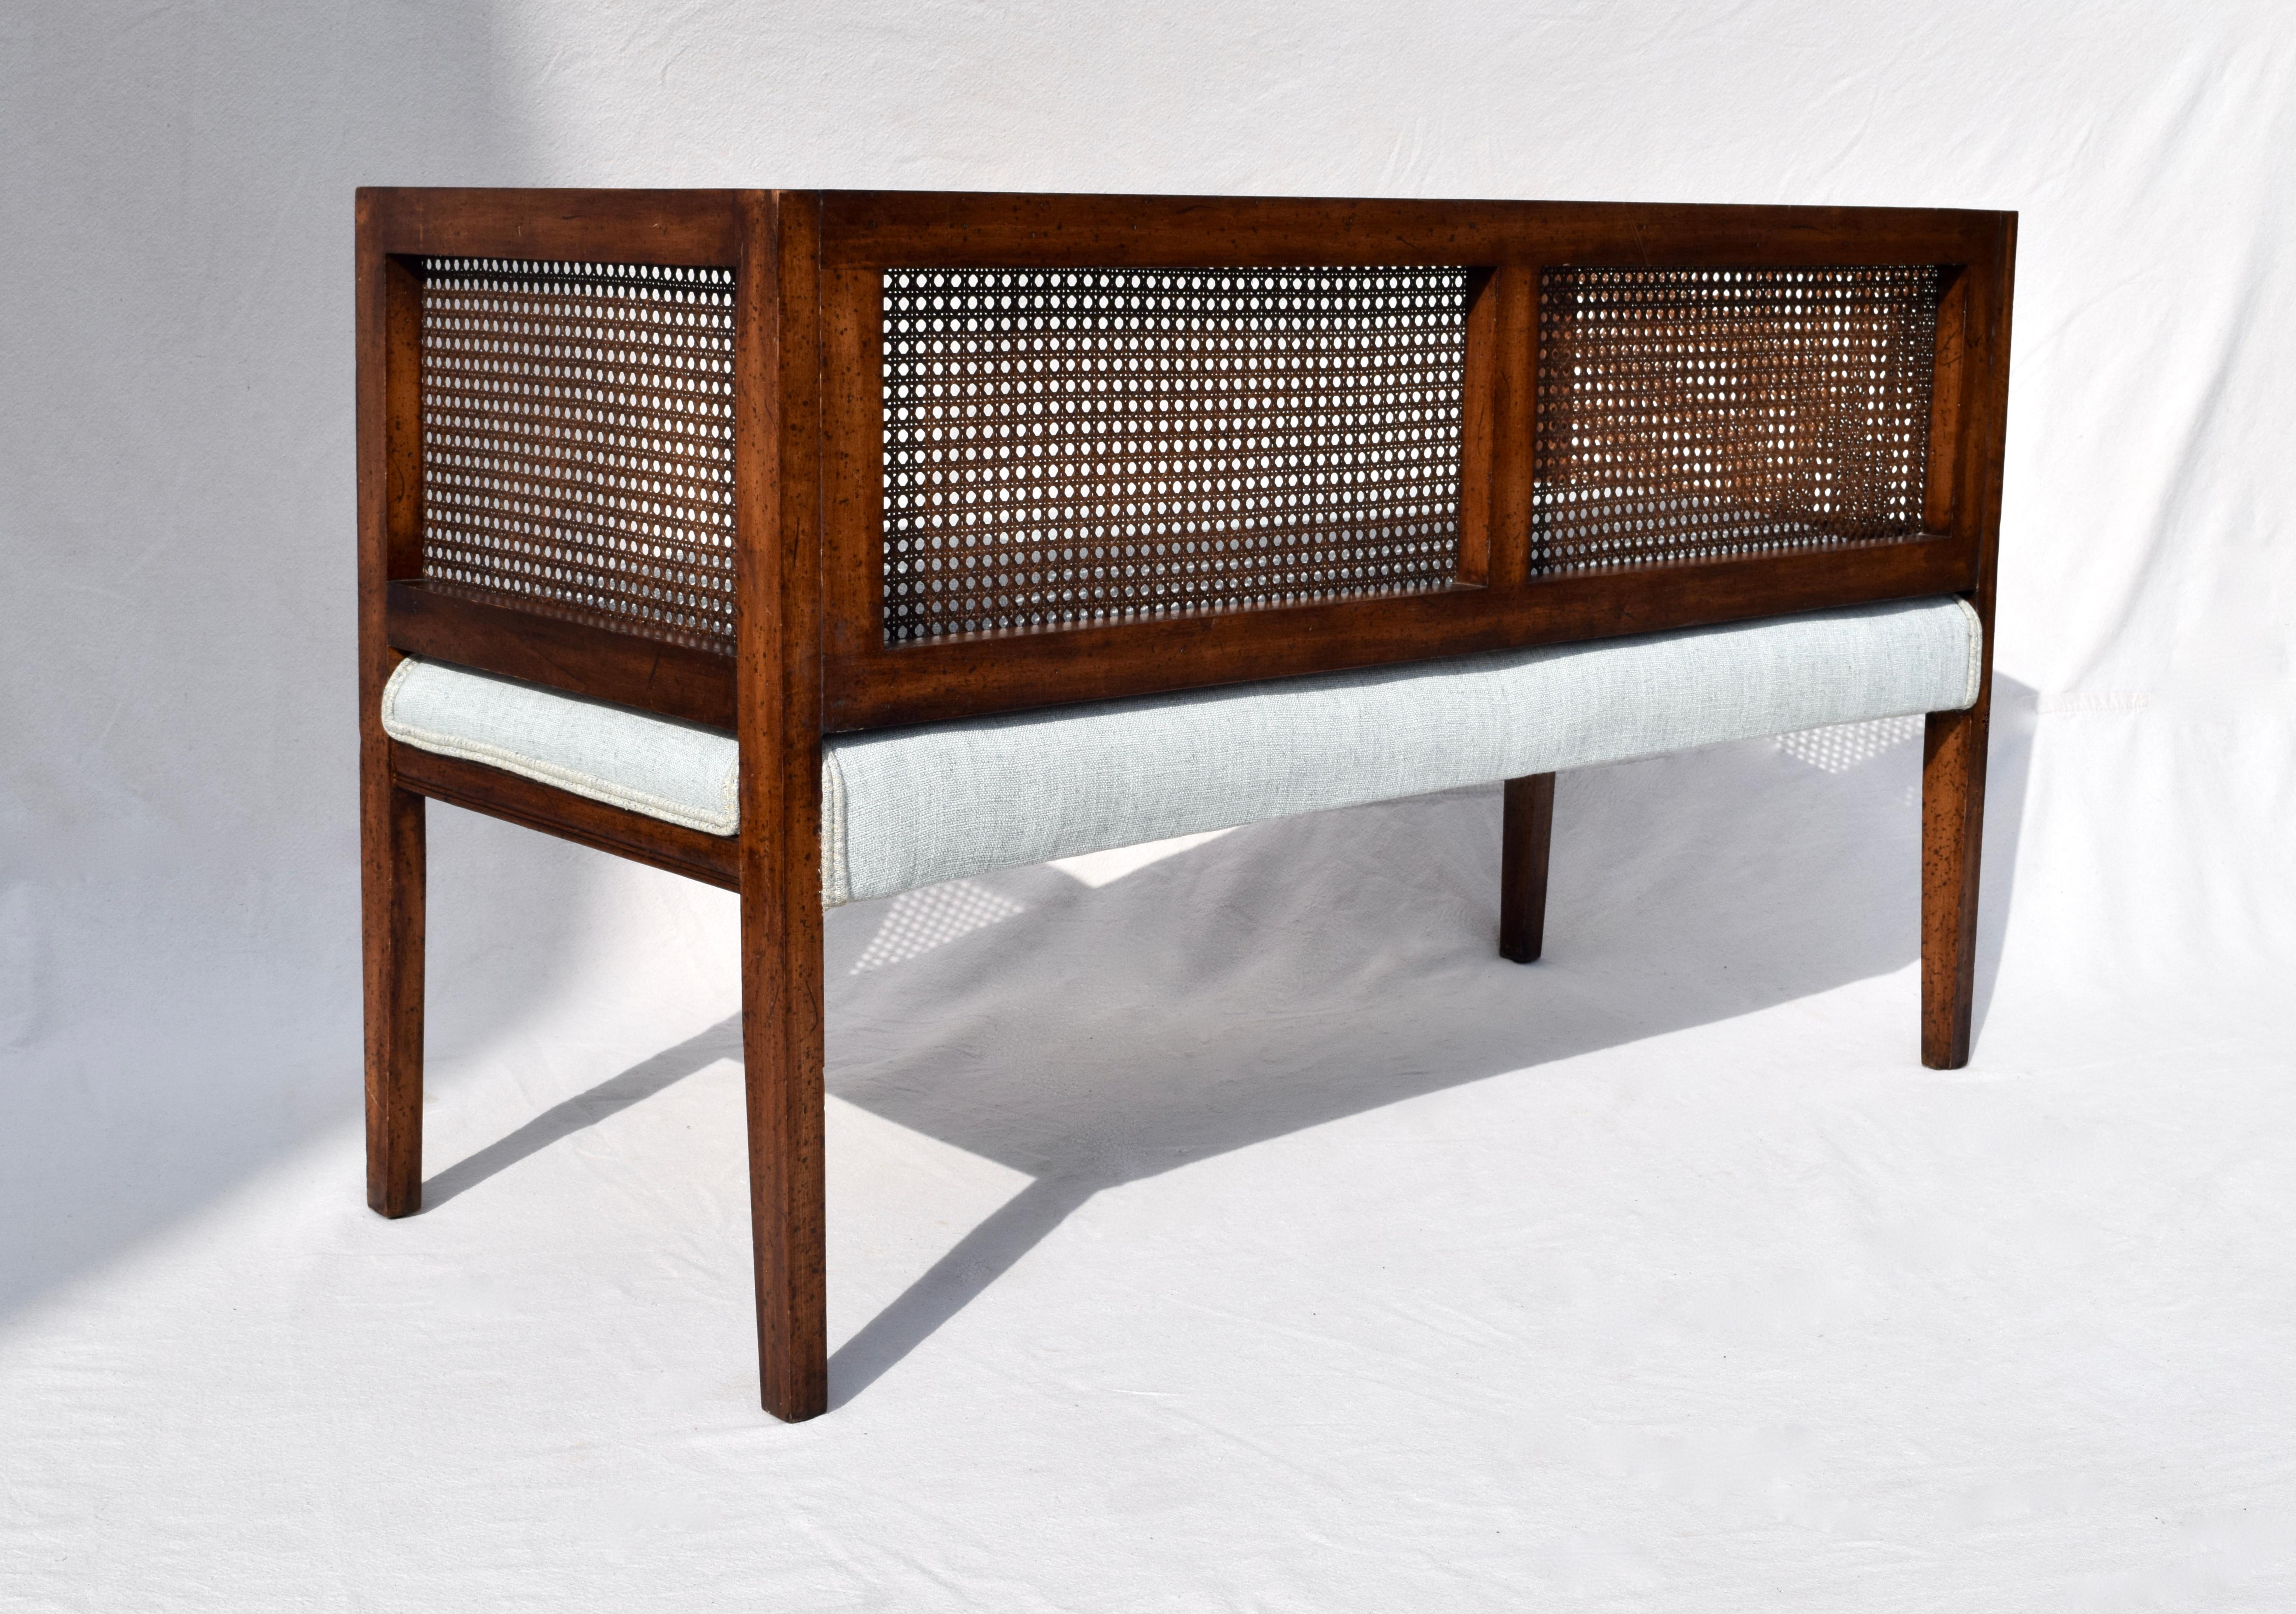 20th Century 1950s Walnut Window Bench in the Manner of Edward Wormley for Dunbar